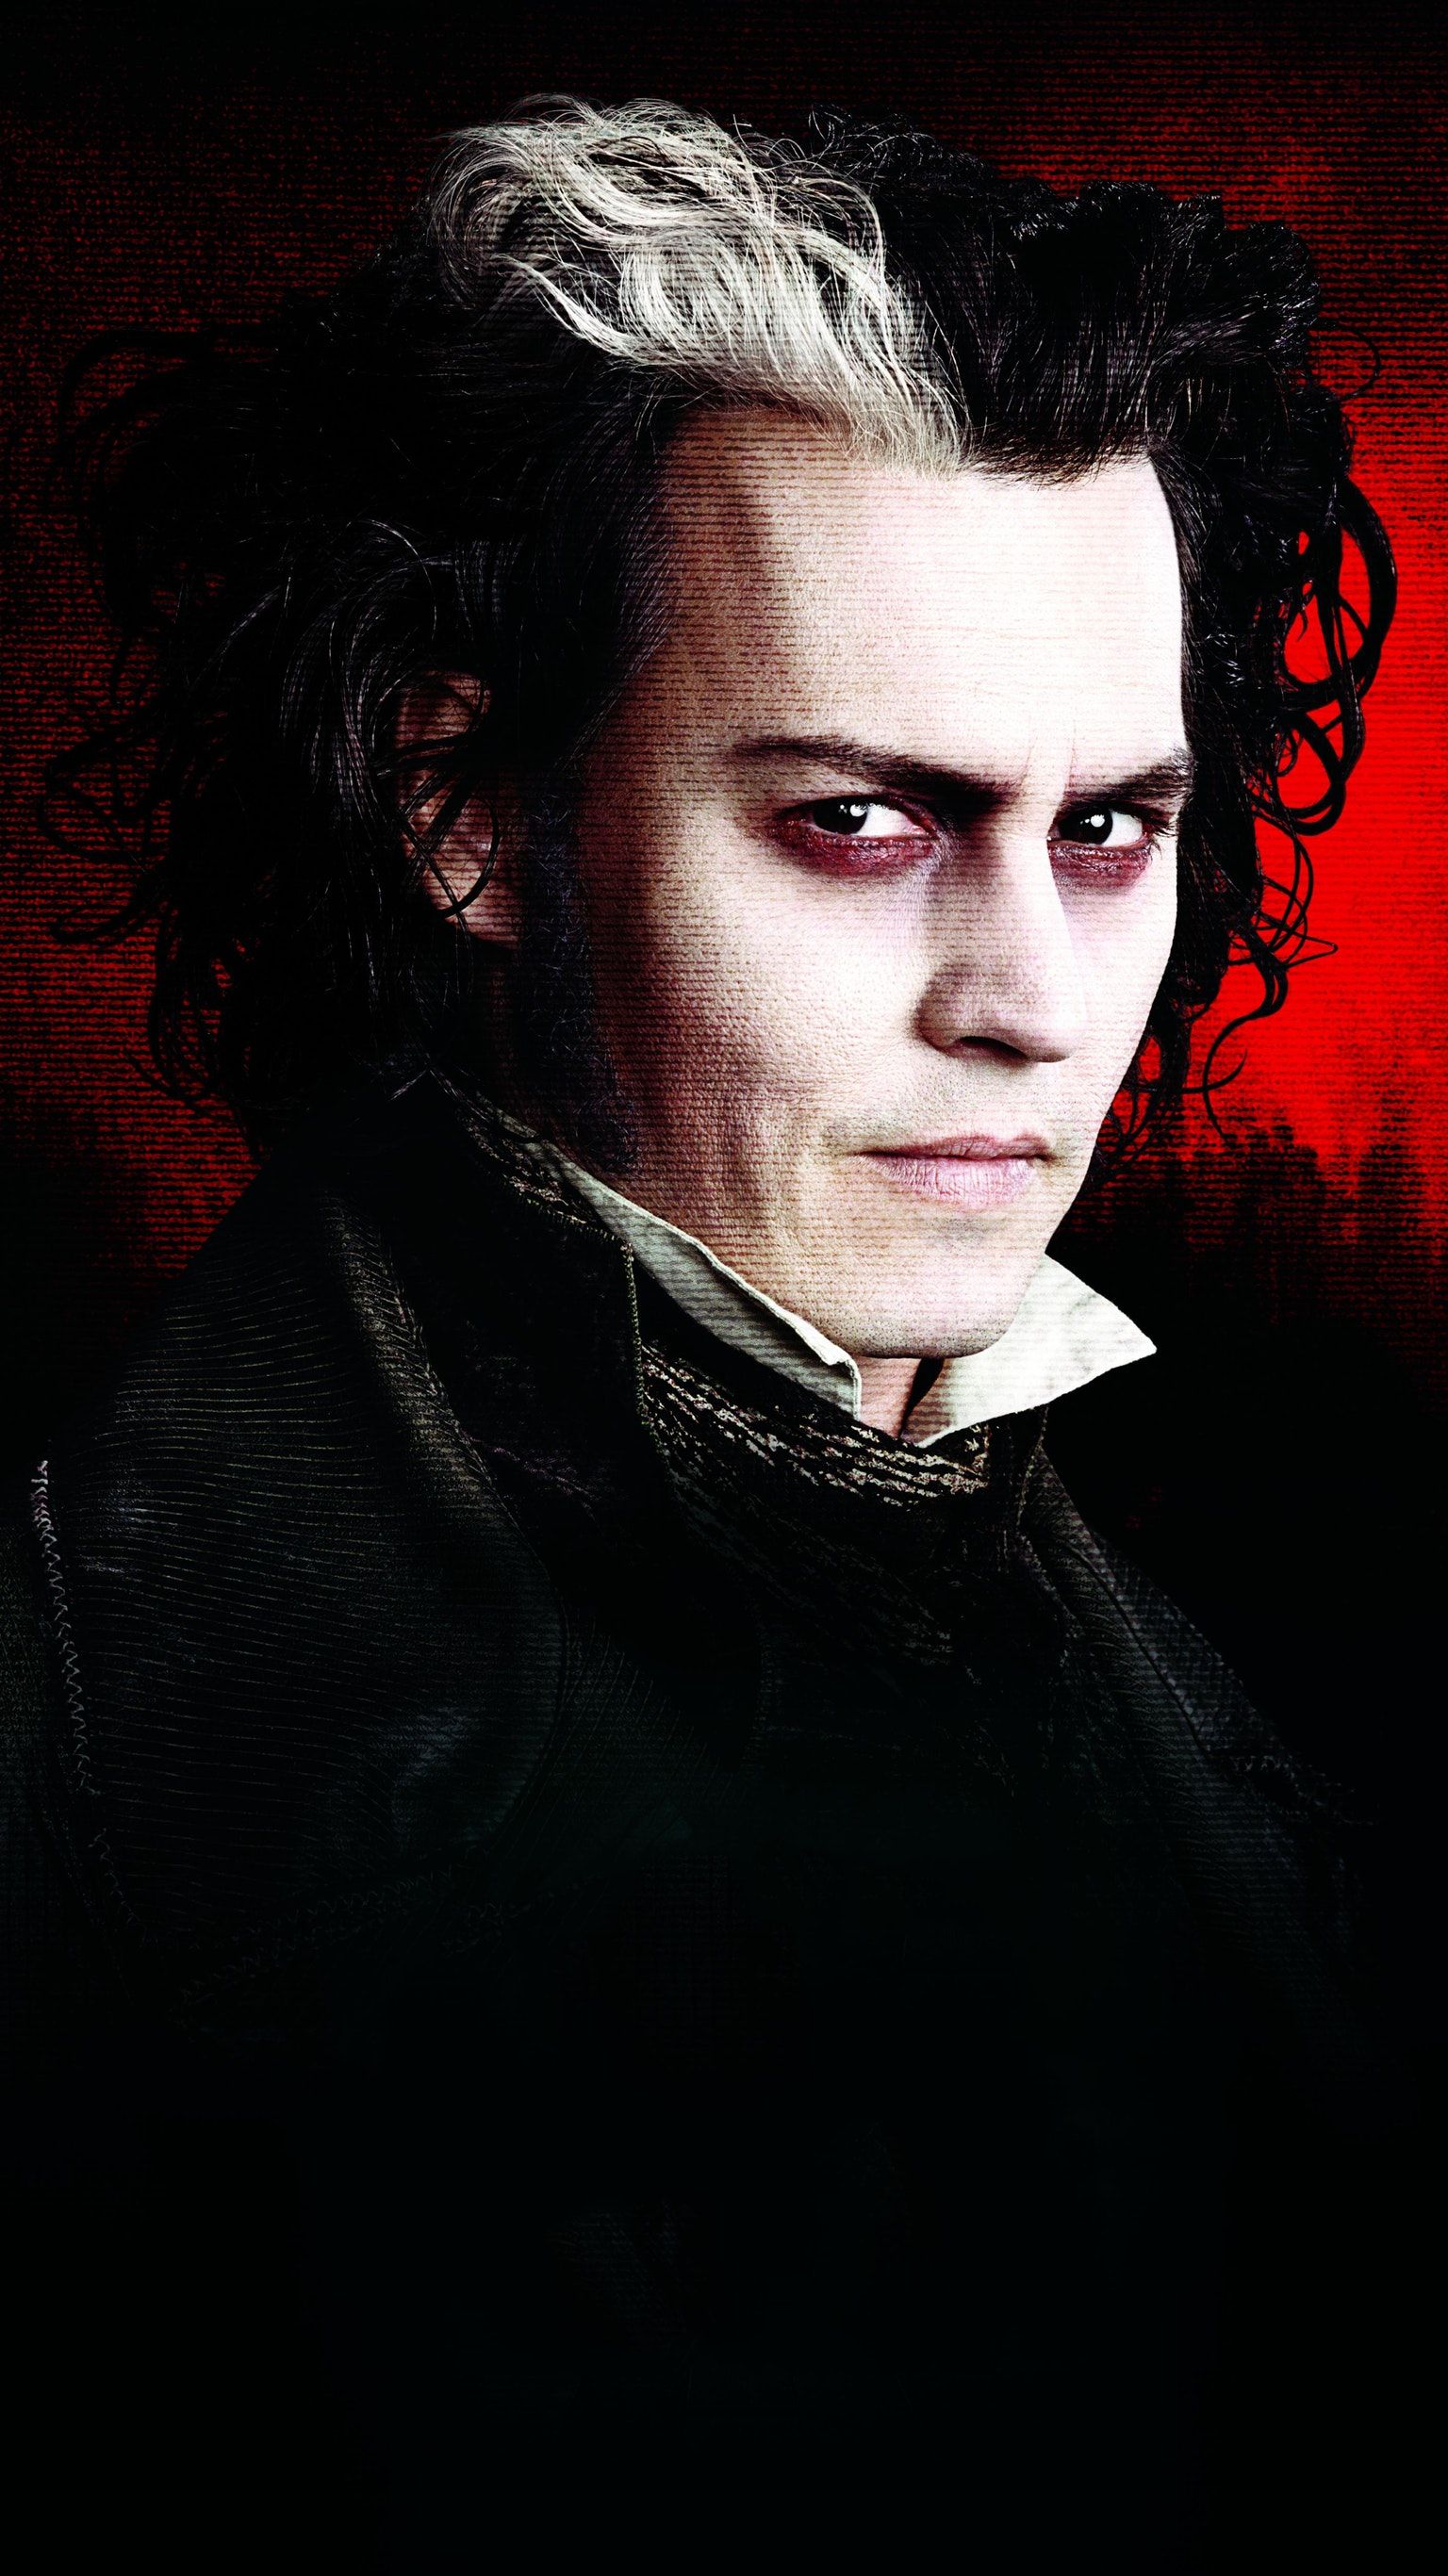 Sweeny Todd Wallpapers